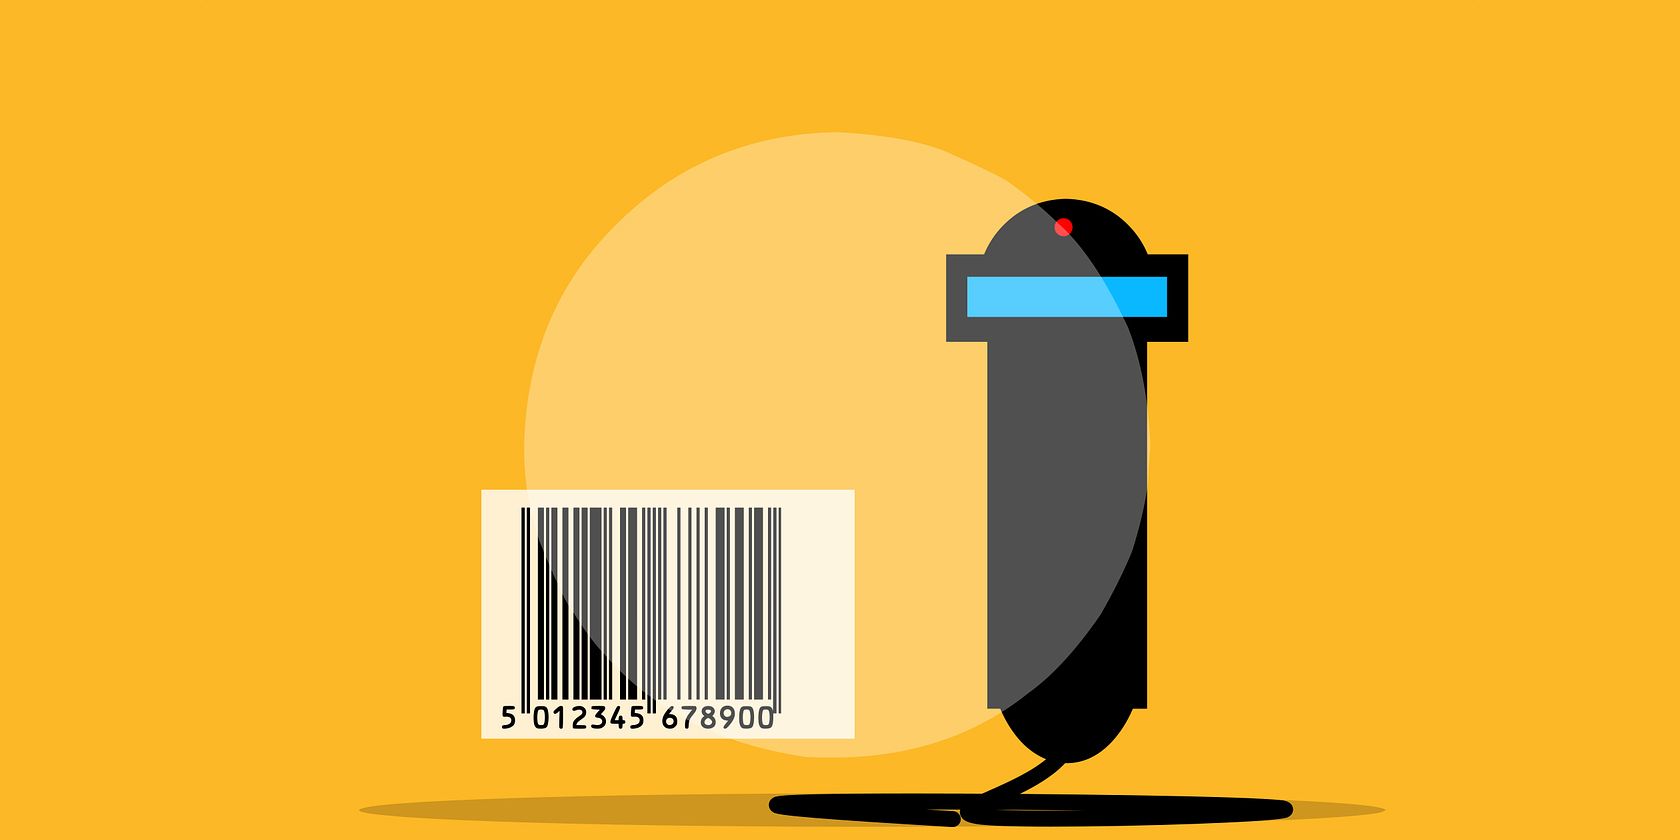 How to Create a Barcode in CorelDRAW